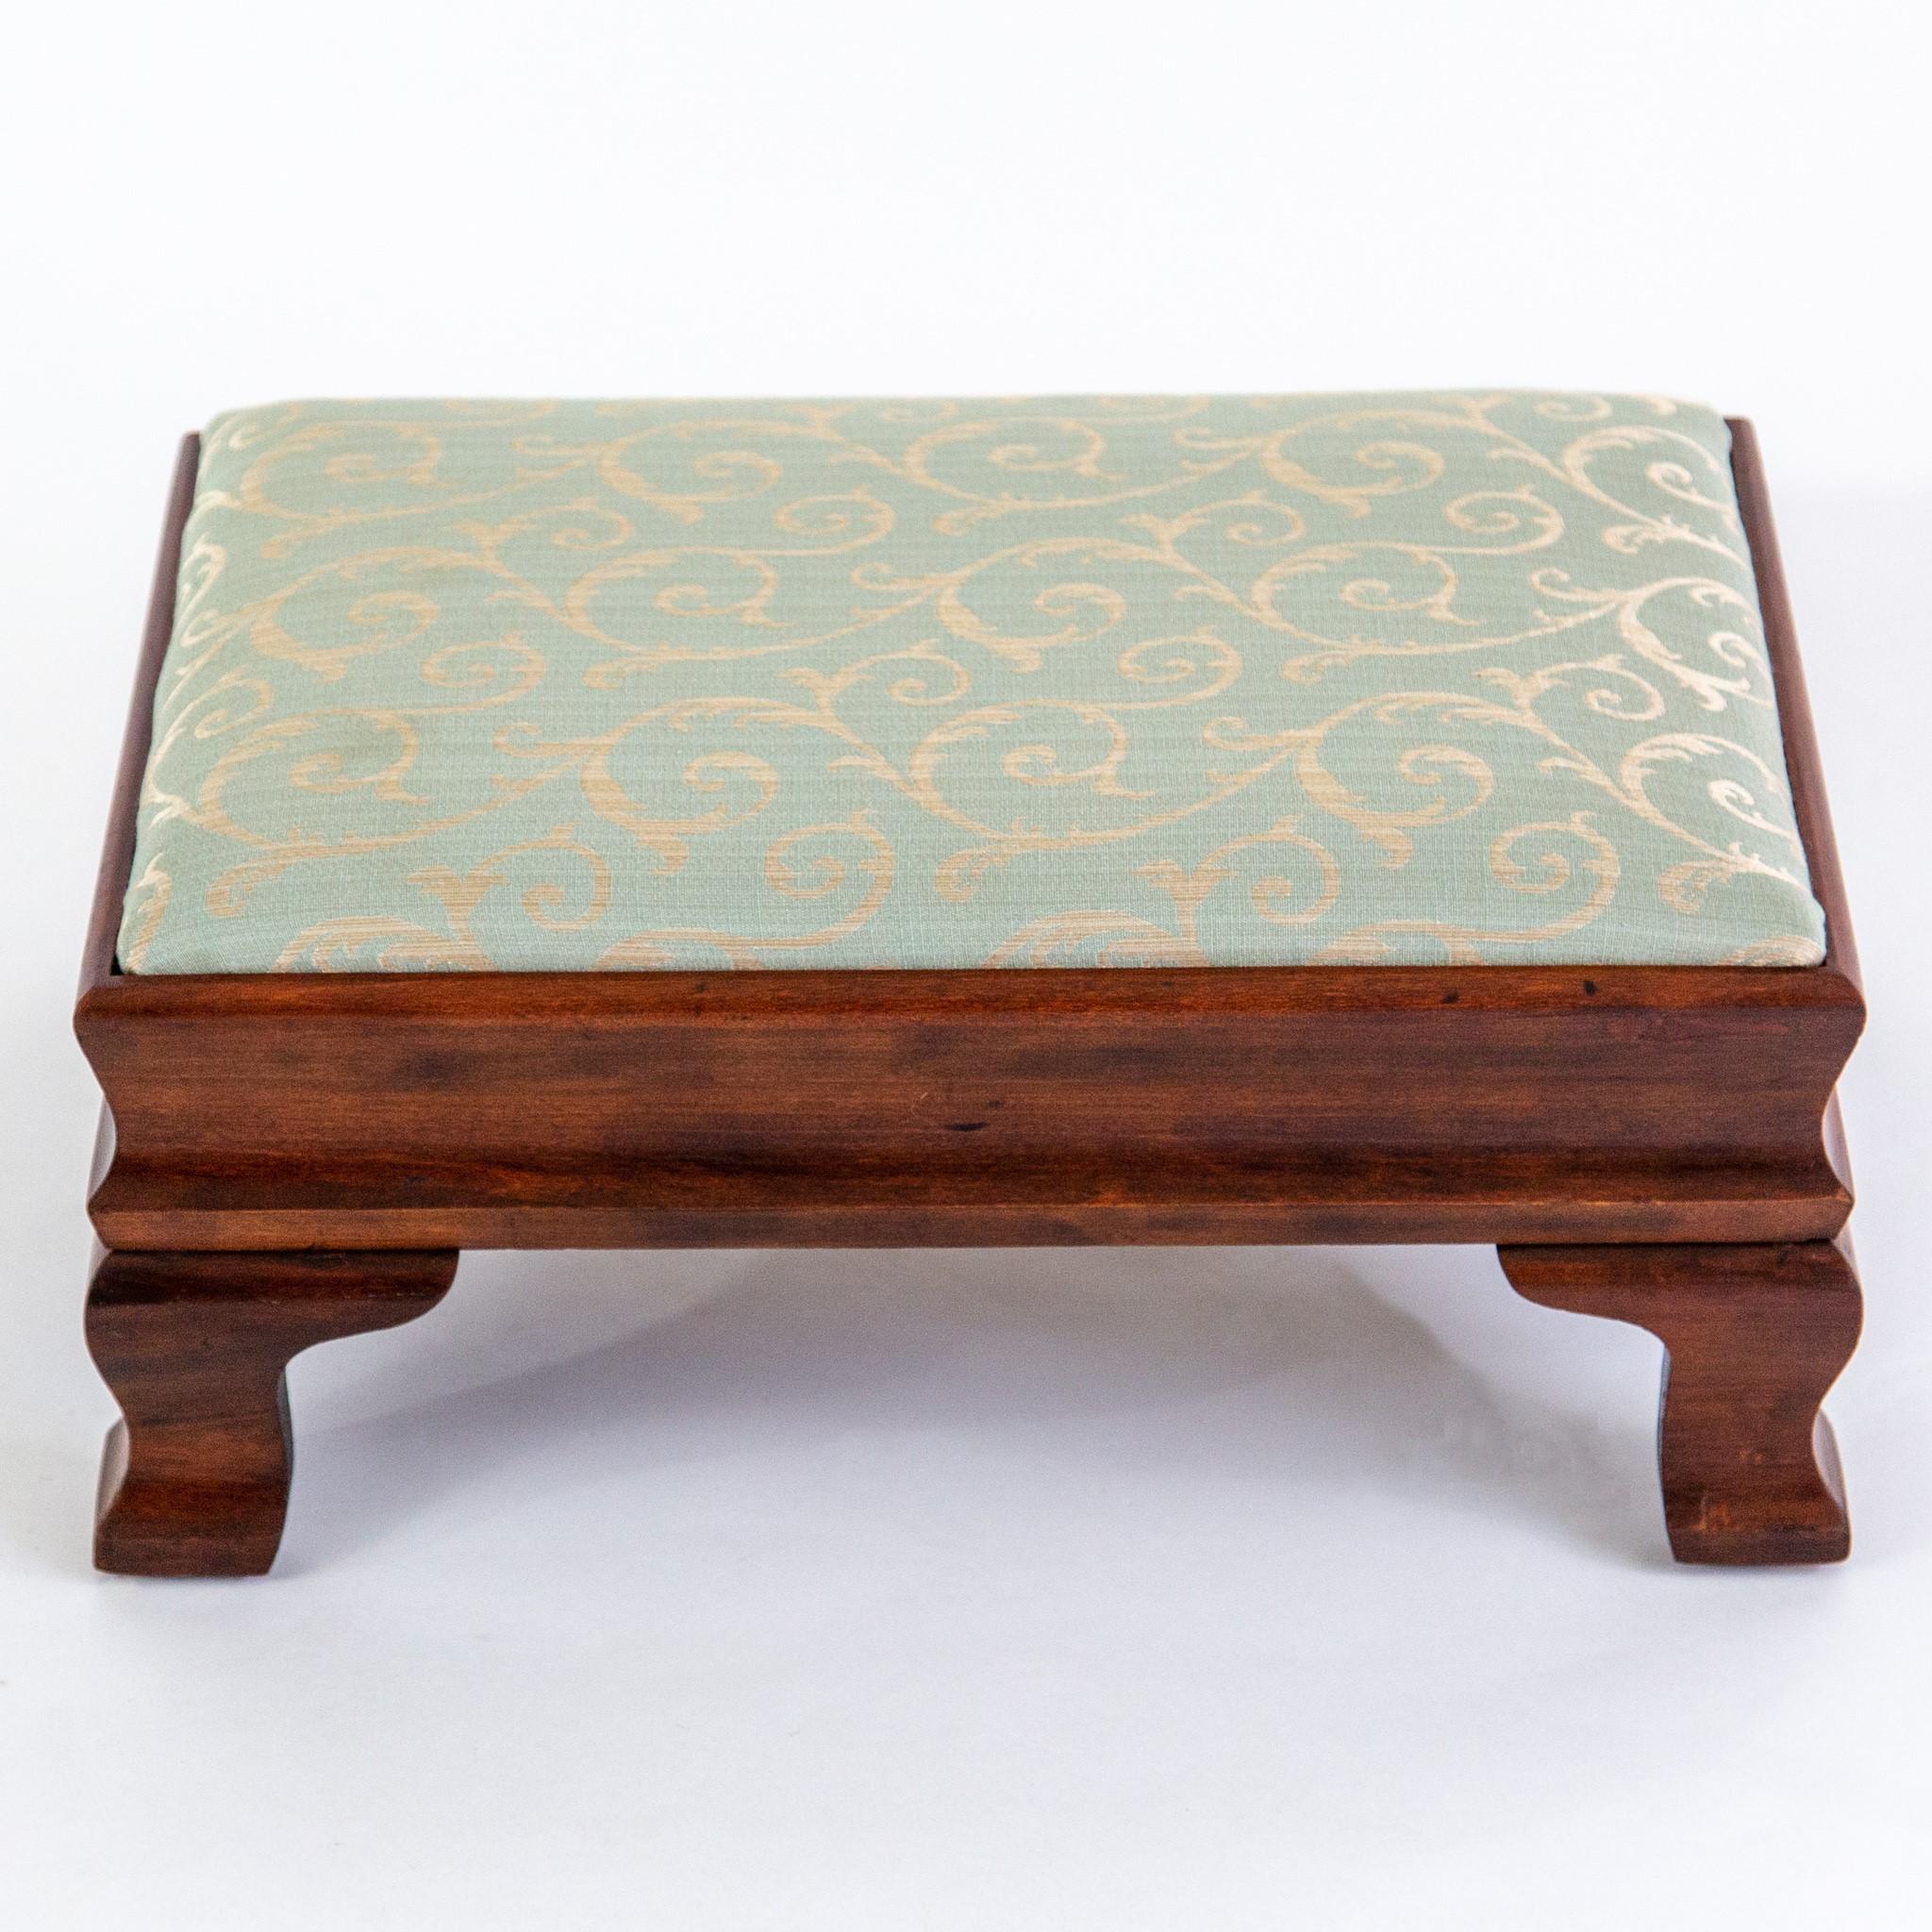 Mid-20th century American Colonial-style walnut footstool with ogee curved sides and bracket feet. The padded drop-in top is covered in light jade green fabric with a champagne scroll pattern. Very good vintage condition with minor age wear.